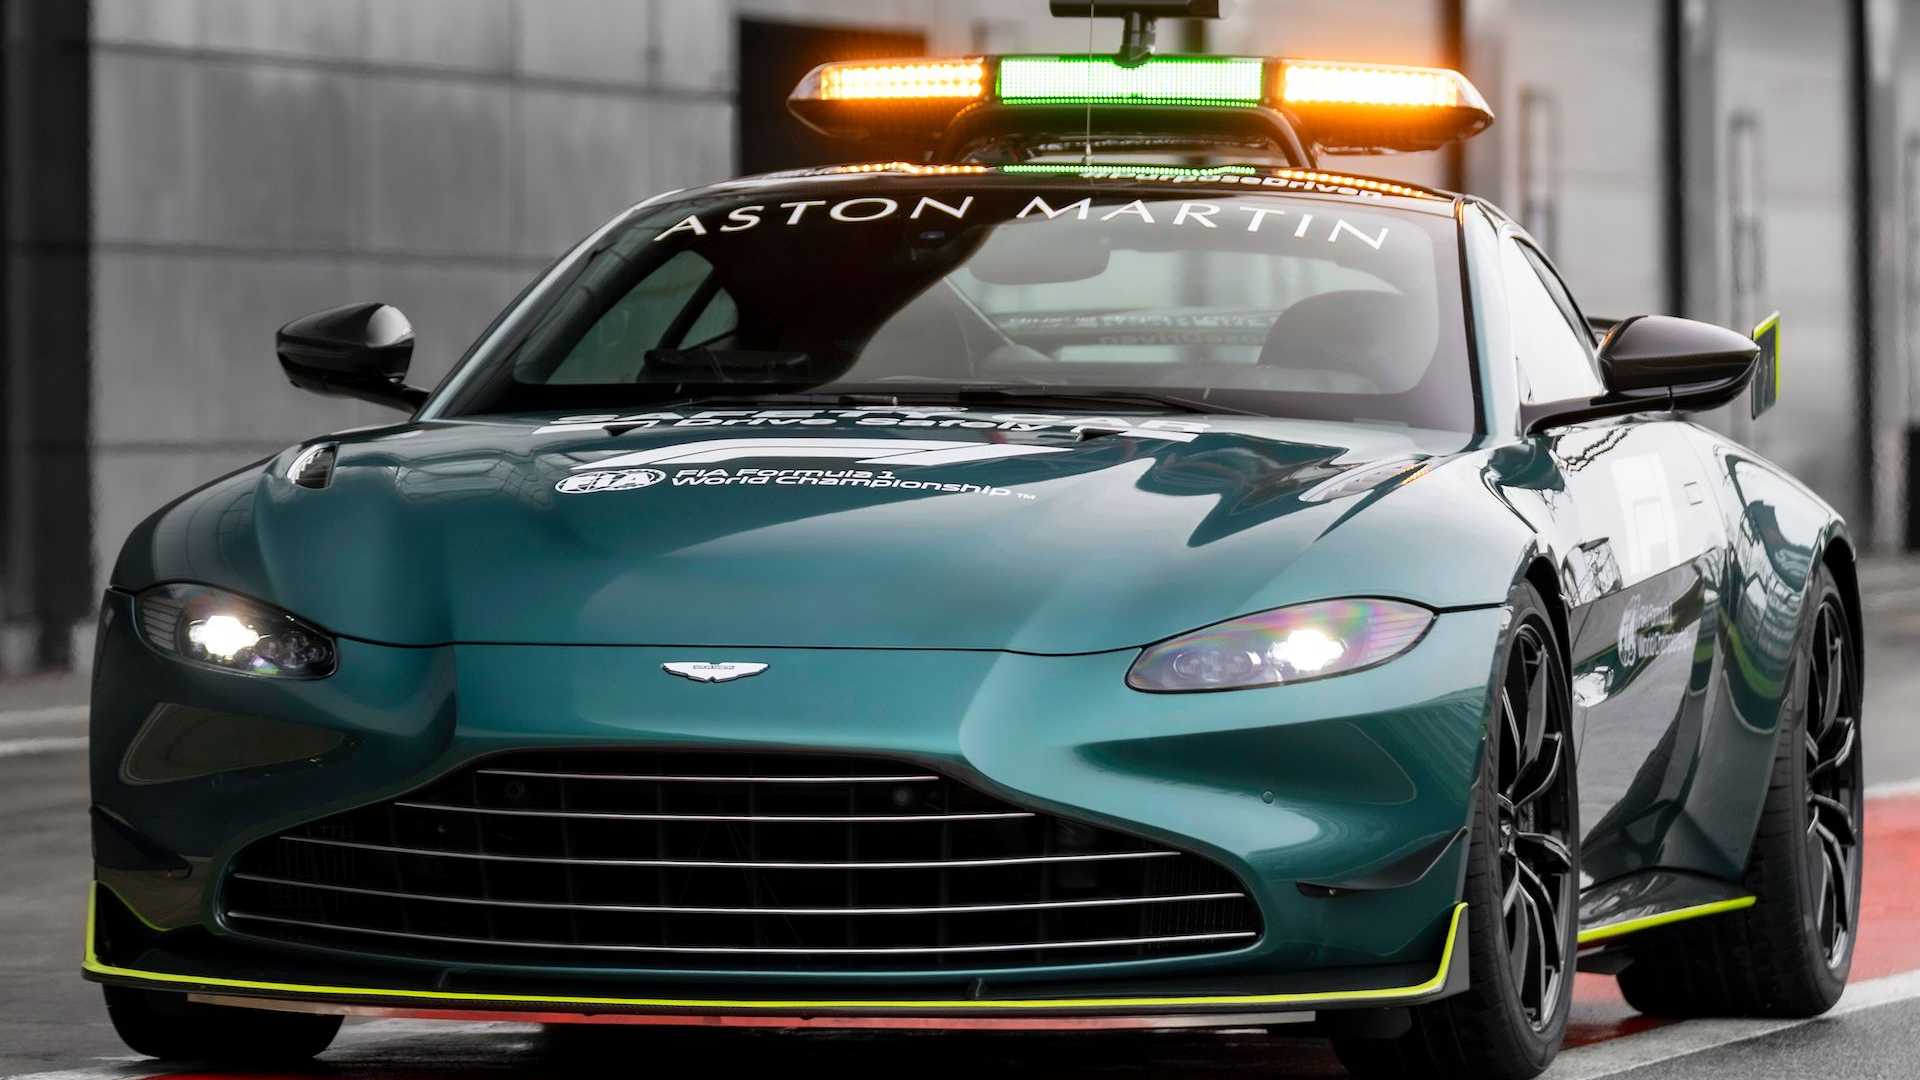 official-formula-1-aston-martin-safety-and-medical-cars-6.jpg